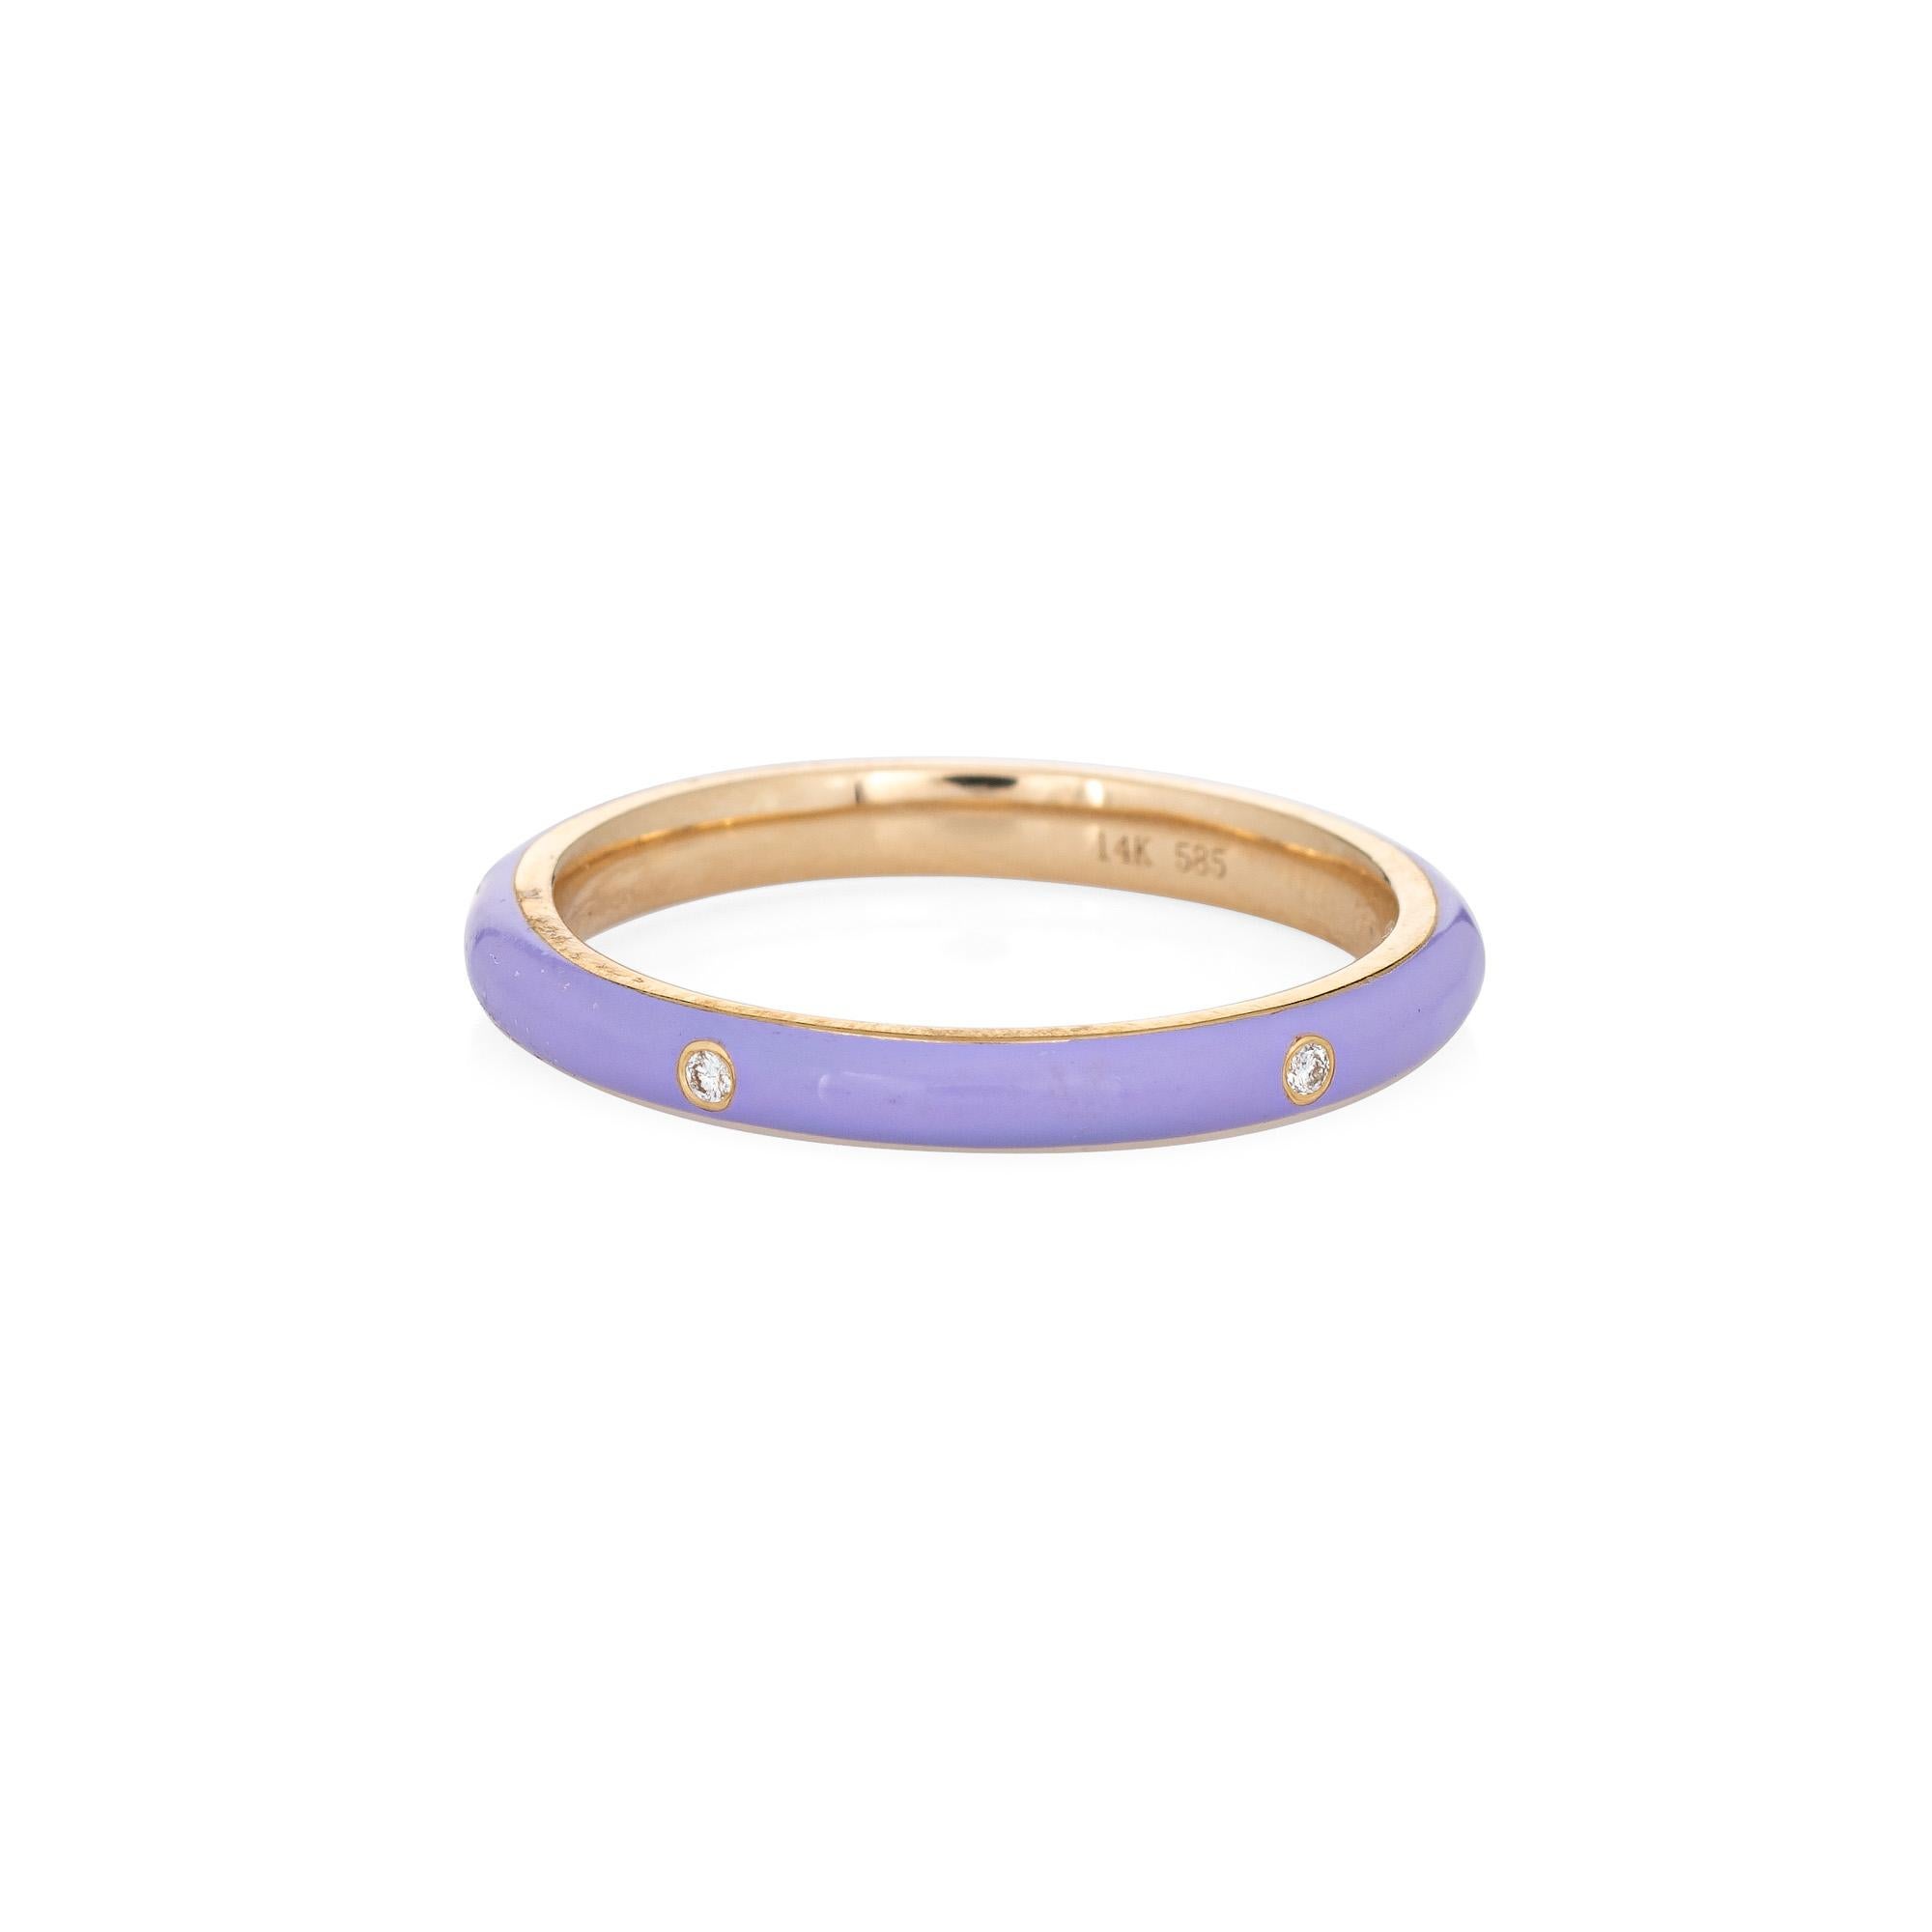 Stylish lilac enamel & diamond stacking band crafted in 14 karat yellow gold. 

4 round brilliant cut diamond totals an estimated 0.03 carats (estimated at H-I color and SI2 clarity). 

The enameled band is a striking pastel lilac color with a small